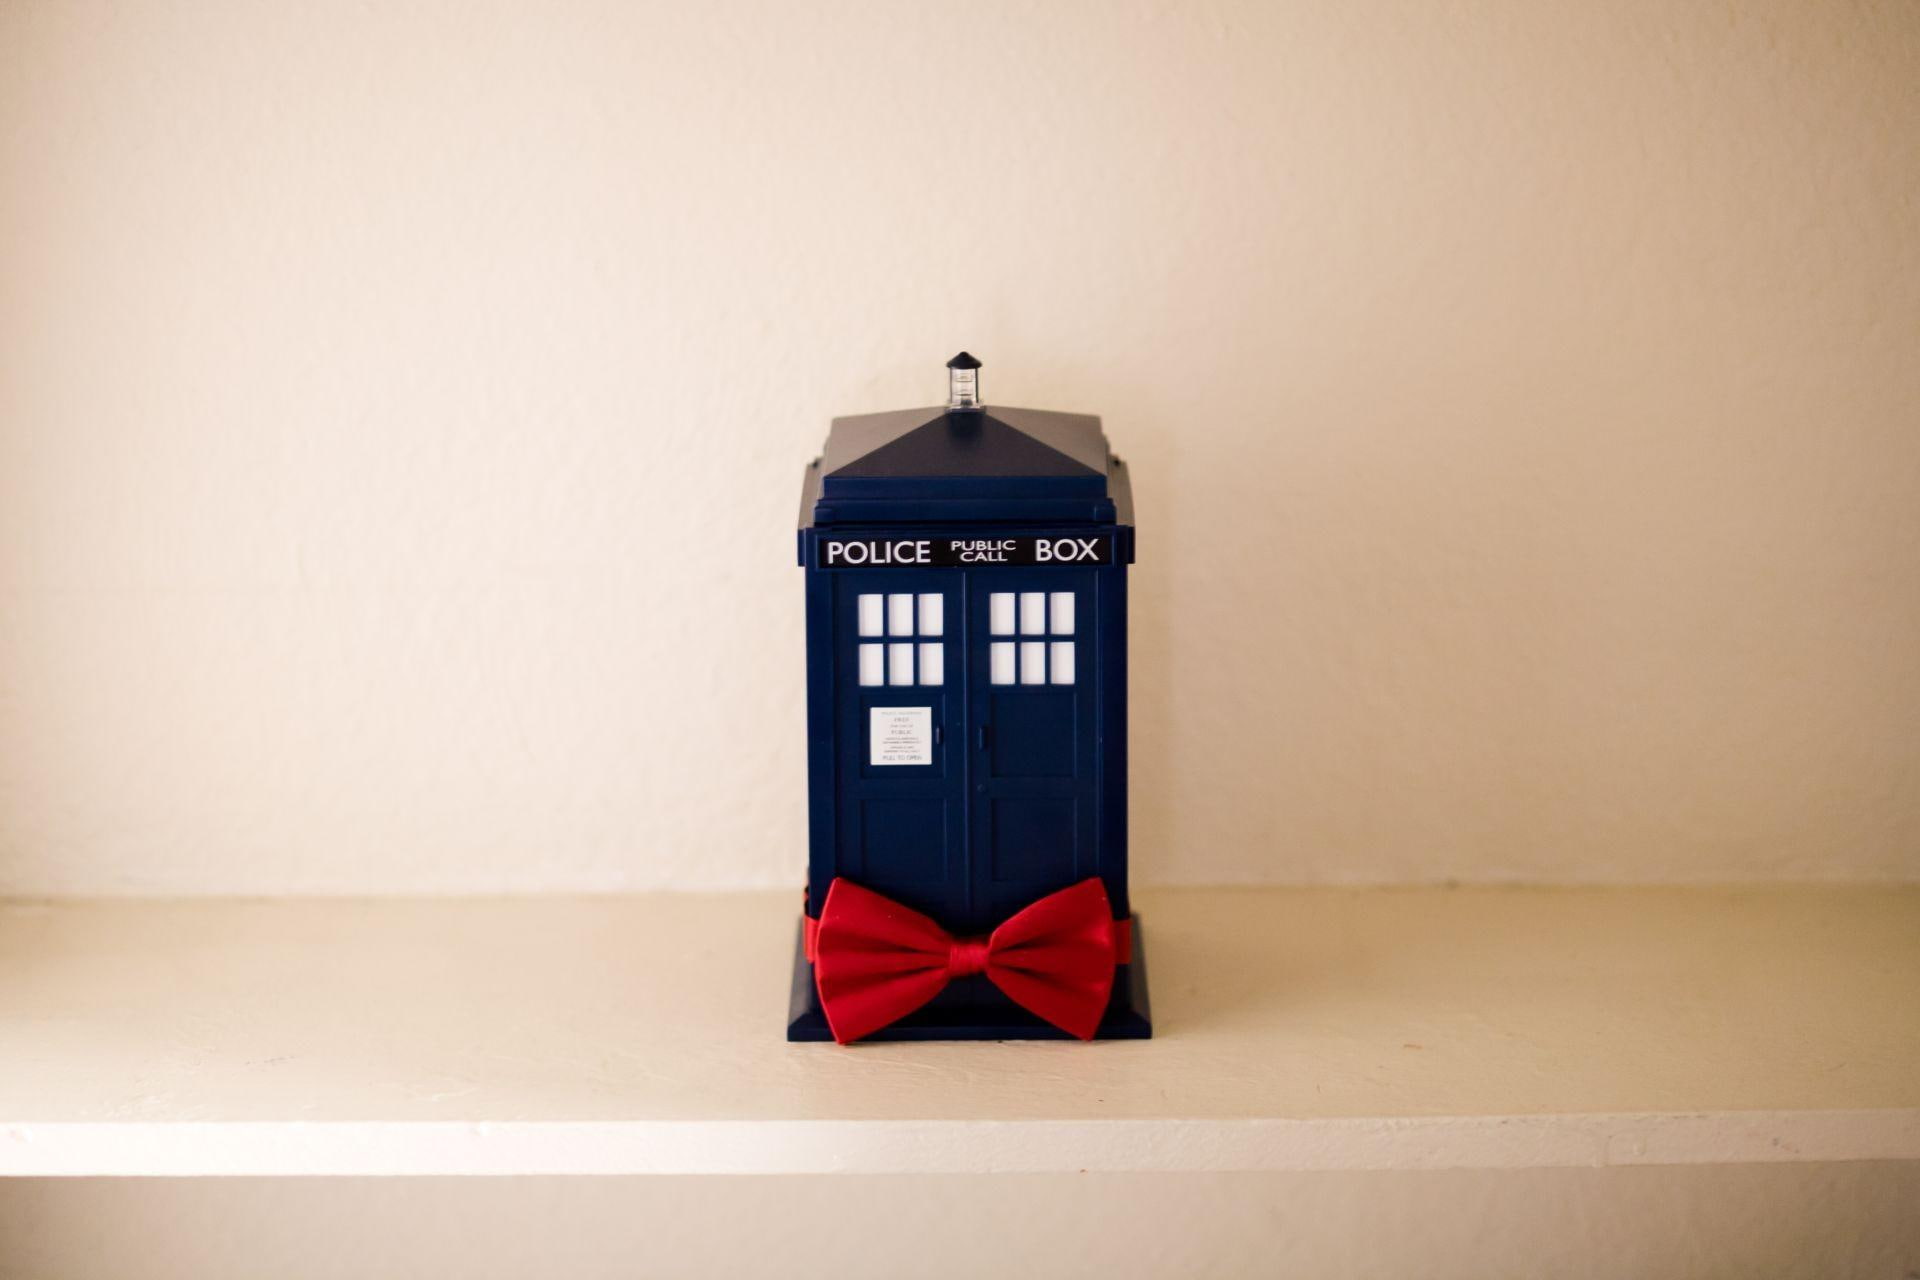 Doctor Who, tv series, photography, miniature, cute, objects